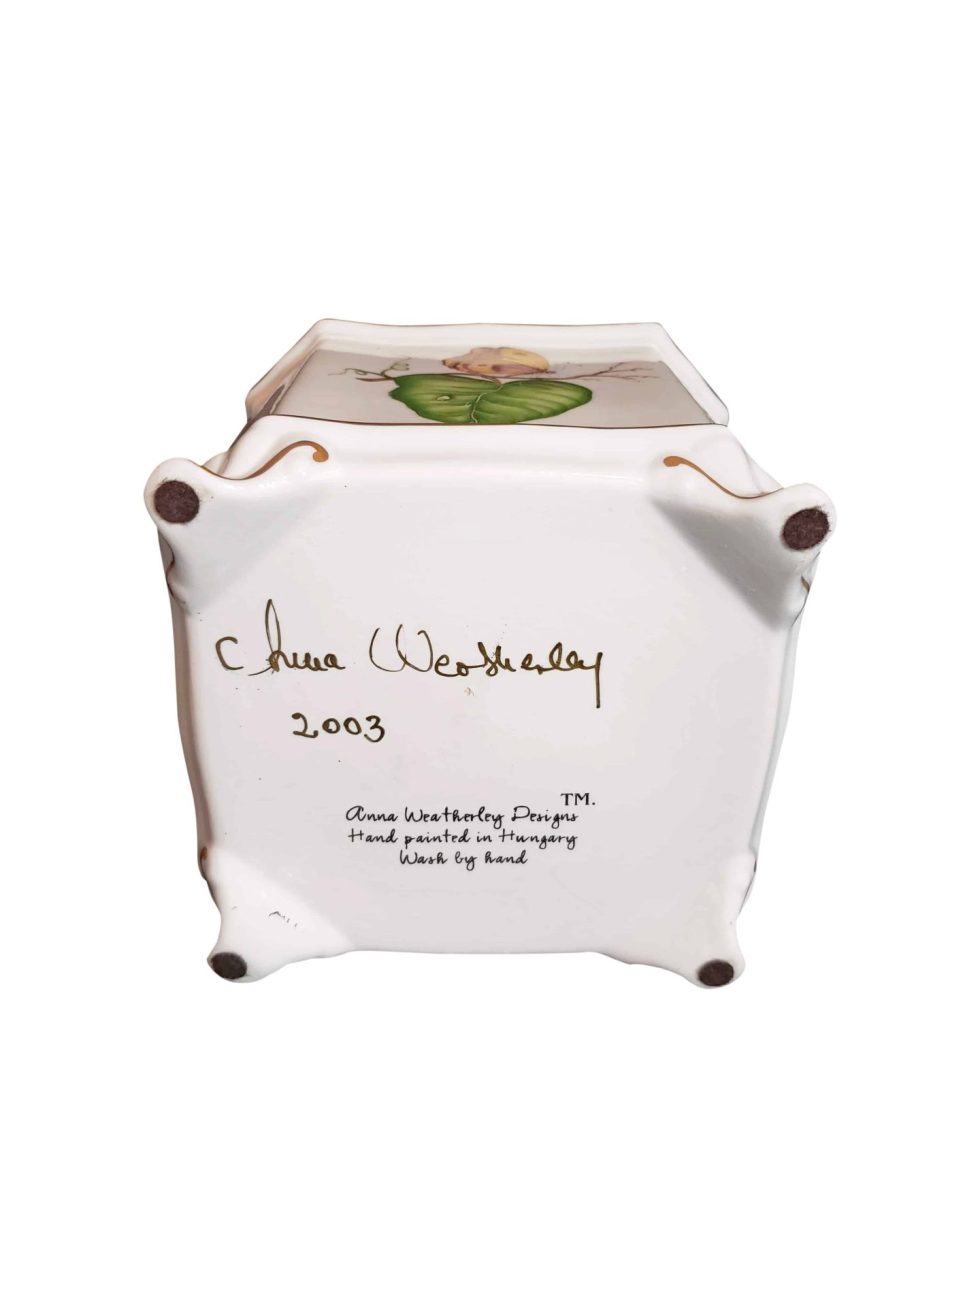 Lot #12530 – Anna Weatherley Floral Butterfly Cache Pot Hand Painted in Hungary Art Anna Weatherley